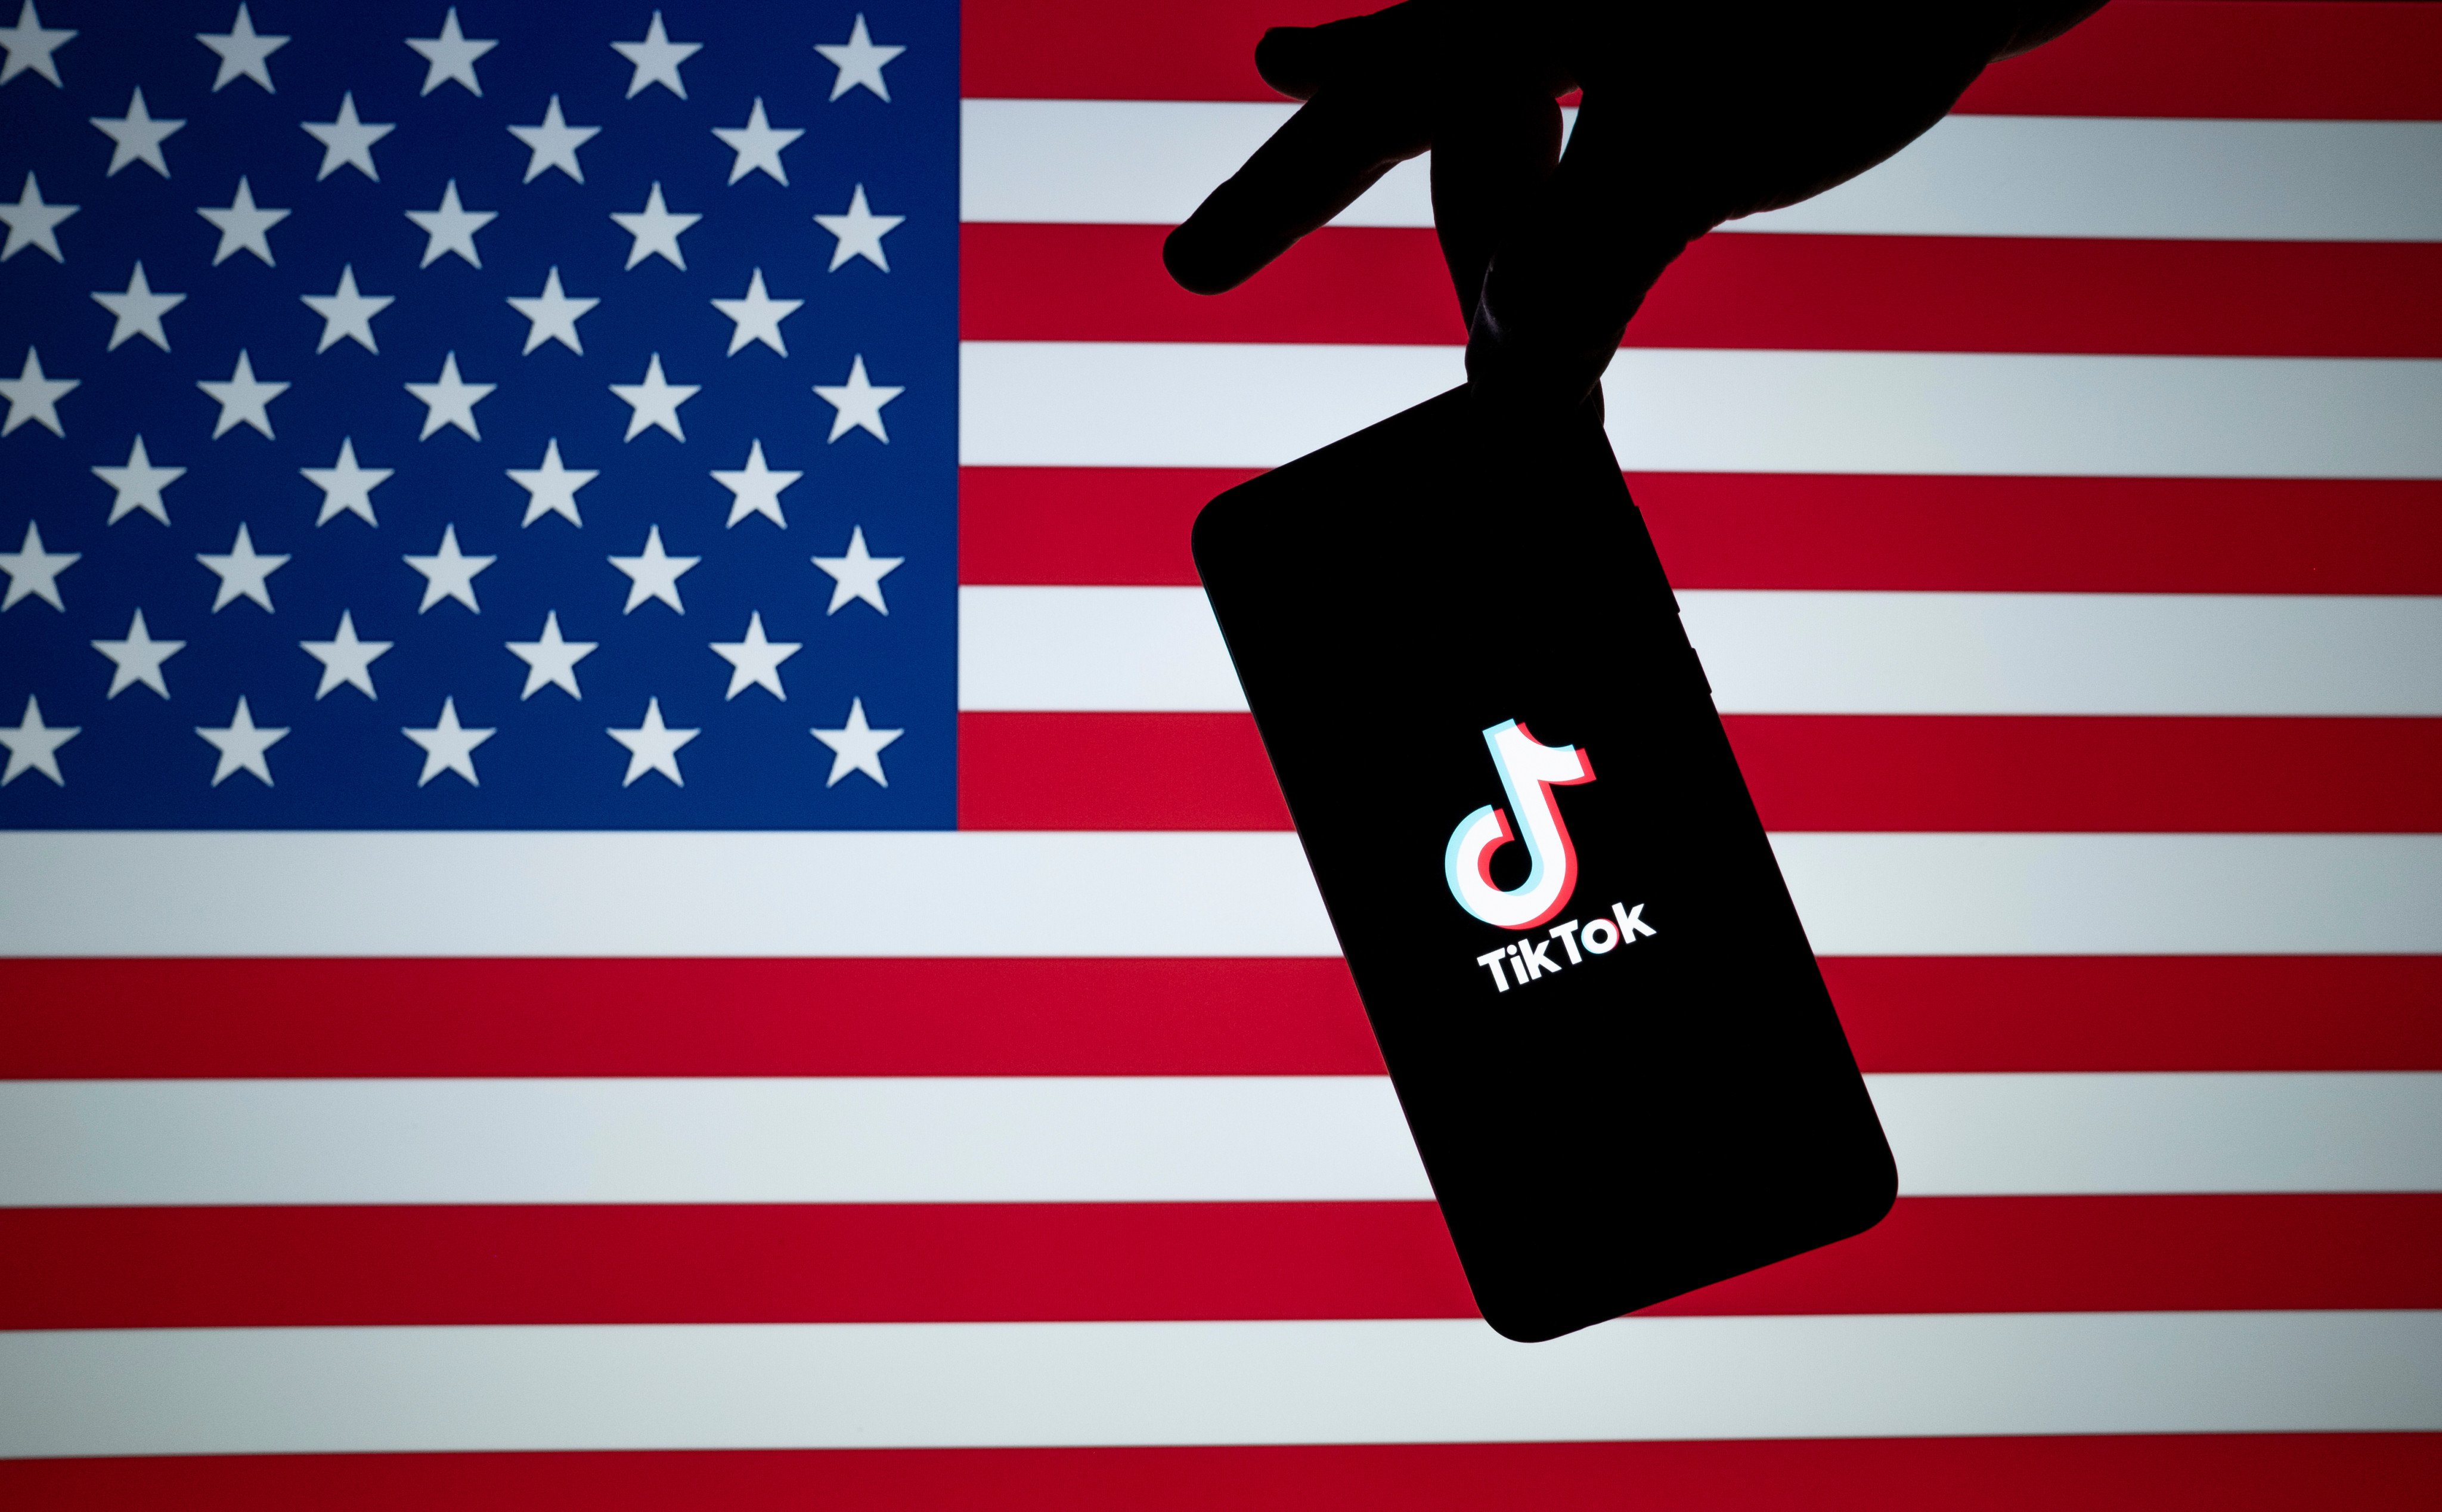 The TikTok logo is seen on the silhouette of a smartphone against an American flag. Photo: Shutterstock